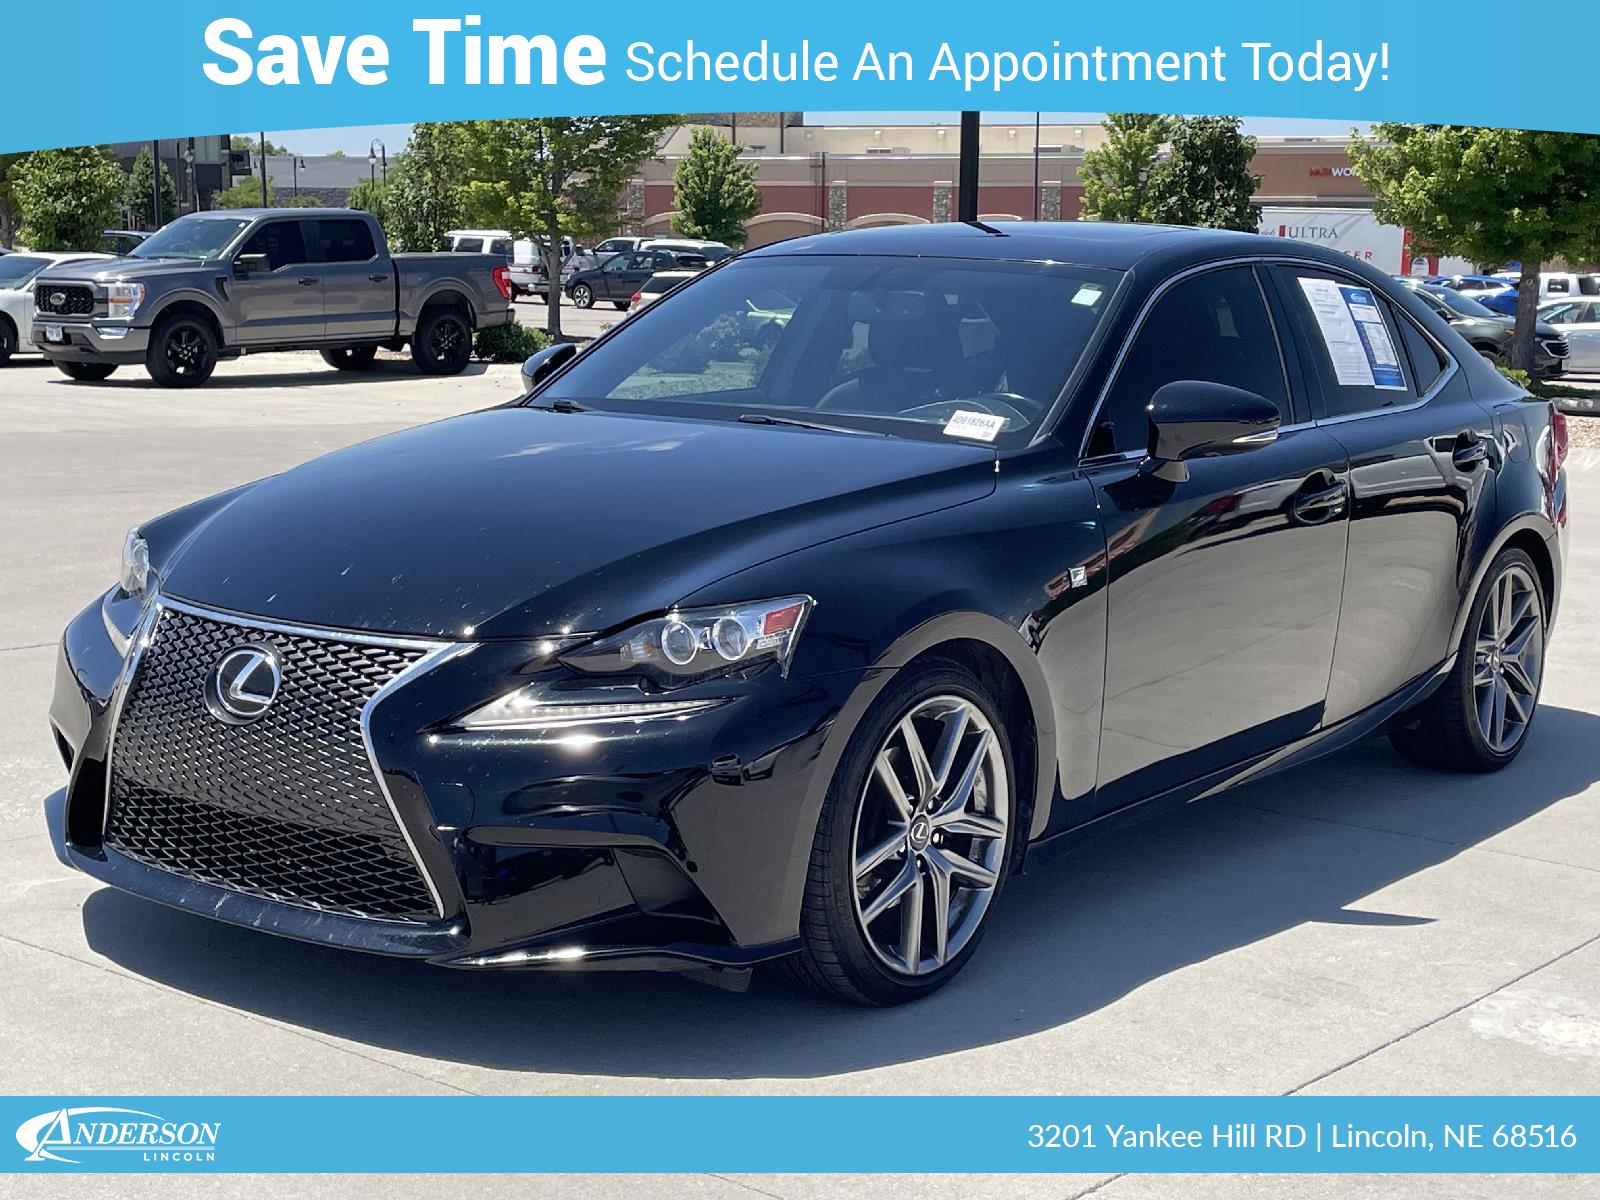 Used 2015 Lexus IS 250 Crafted Line Sedan for sale in Lincoln NE